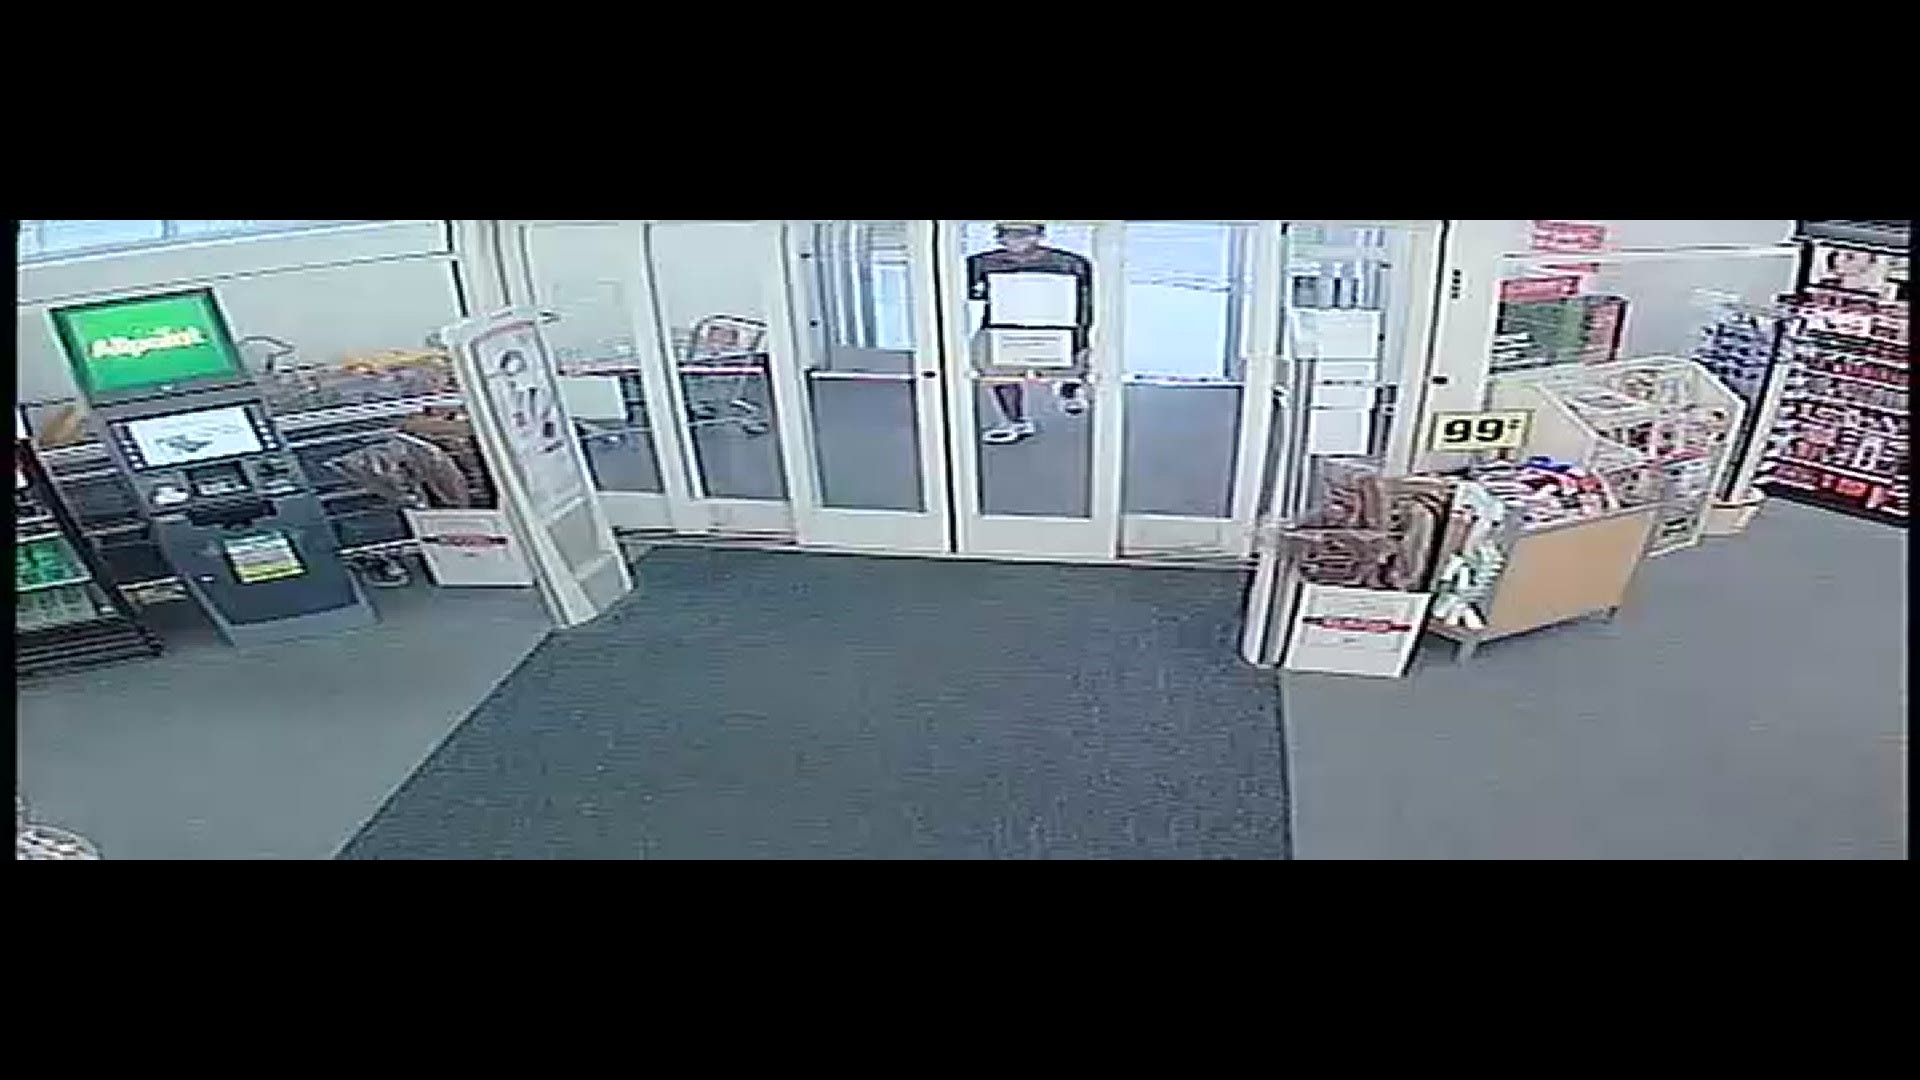 Two people robbed a CVS store in Maplewood on Sunday.